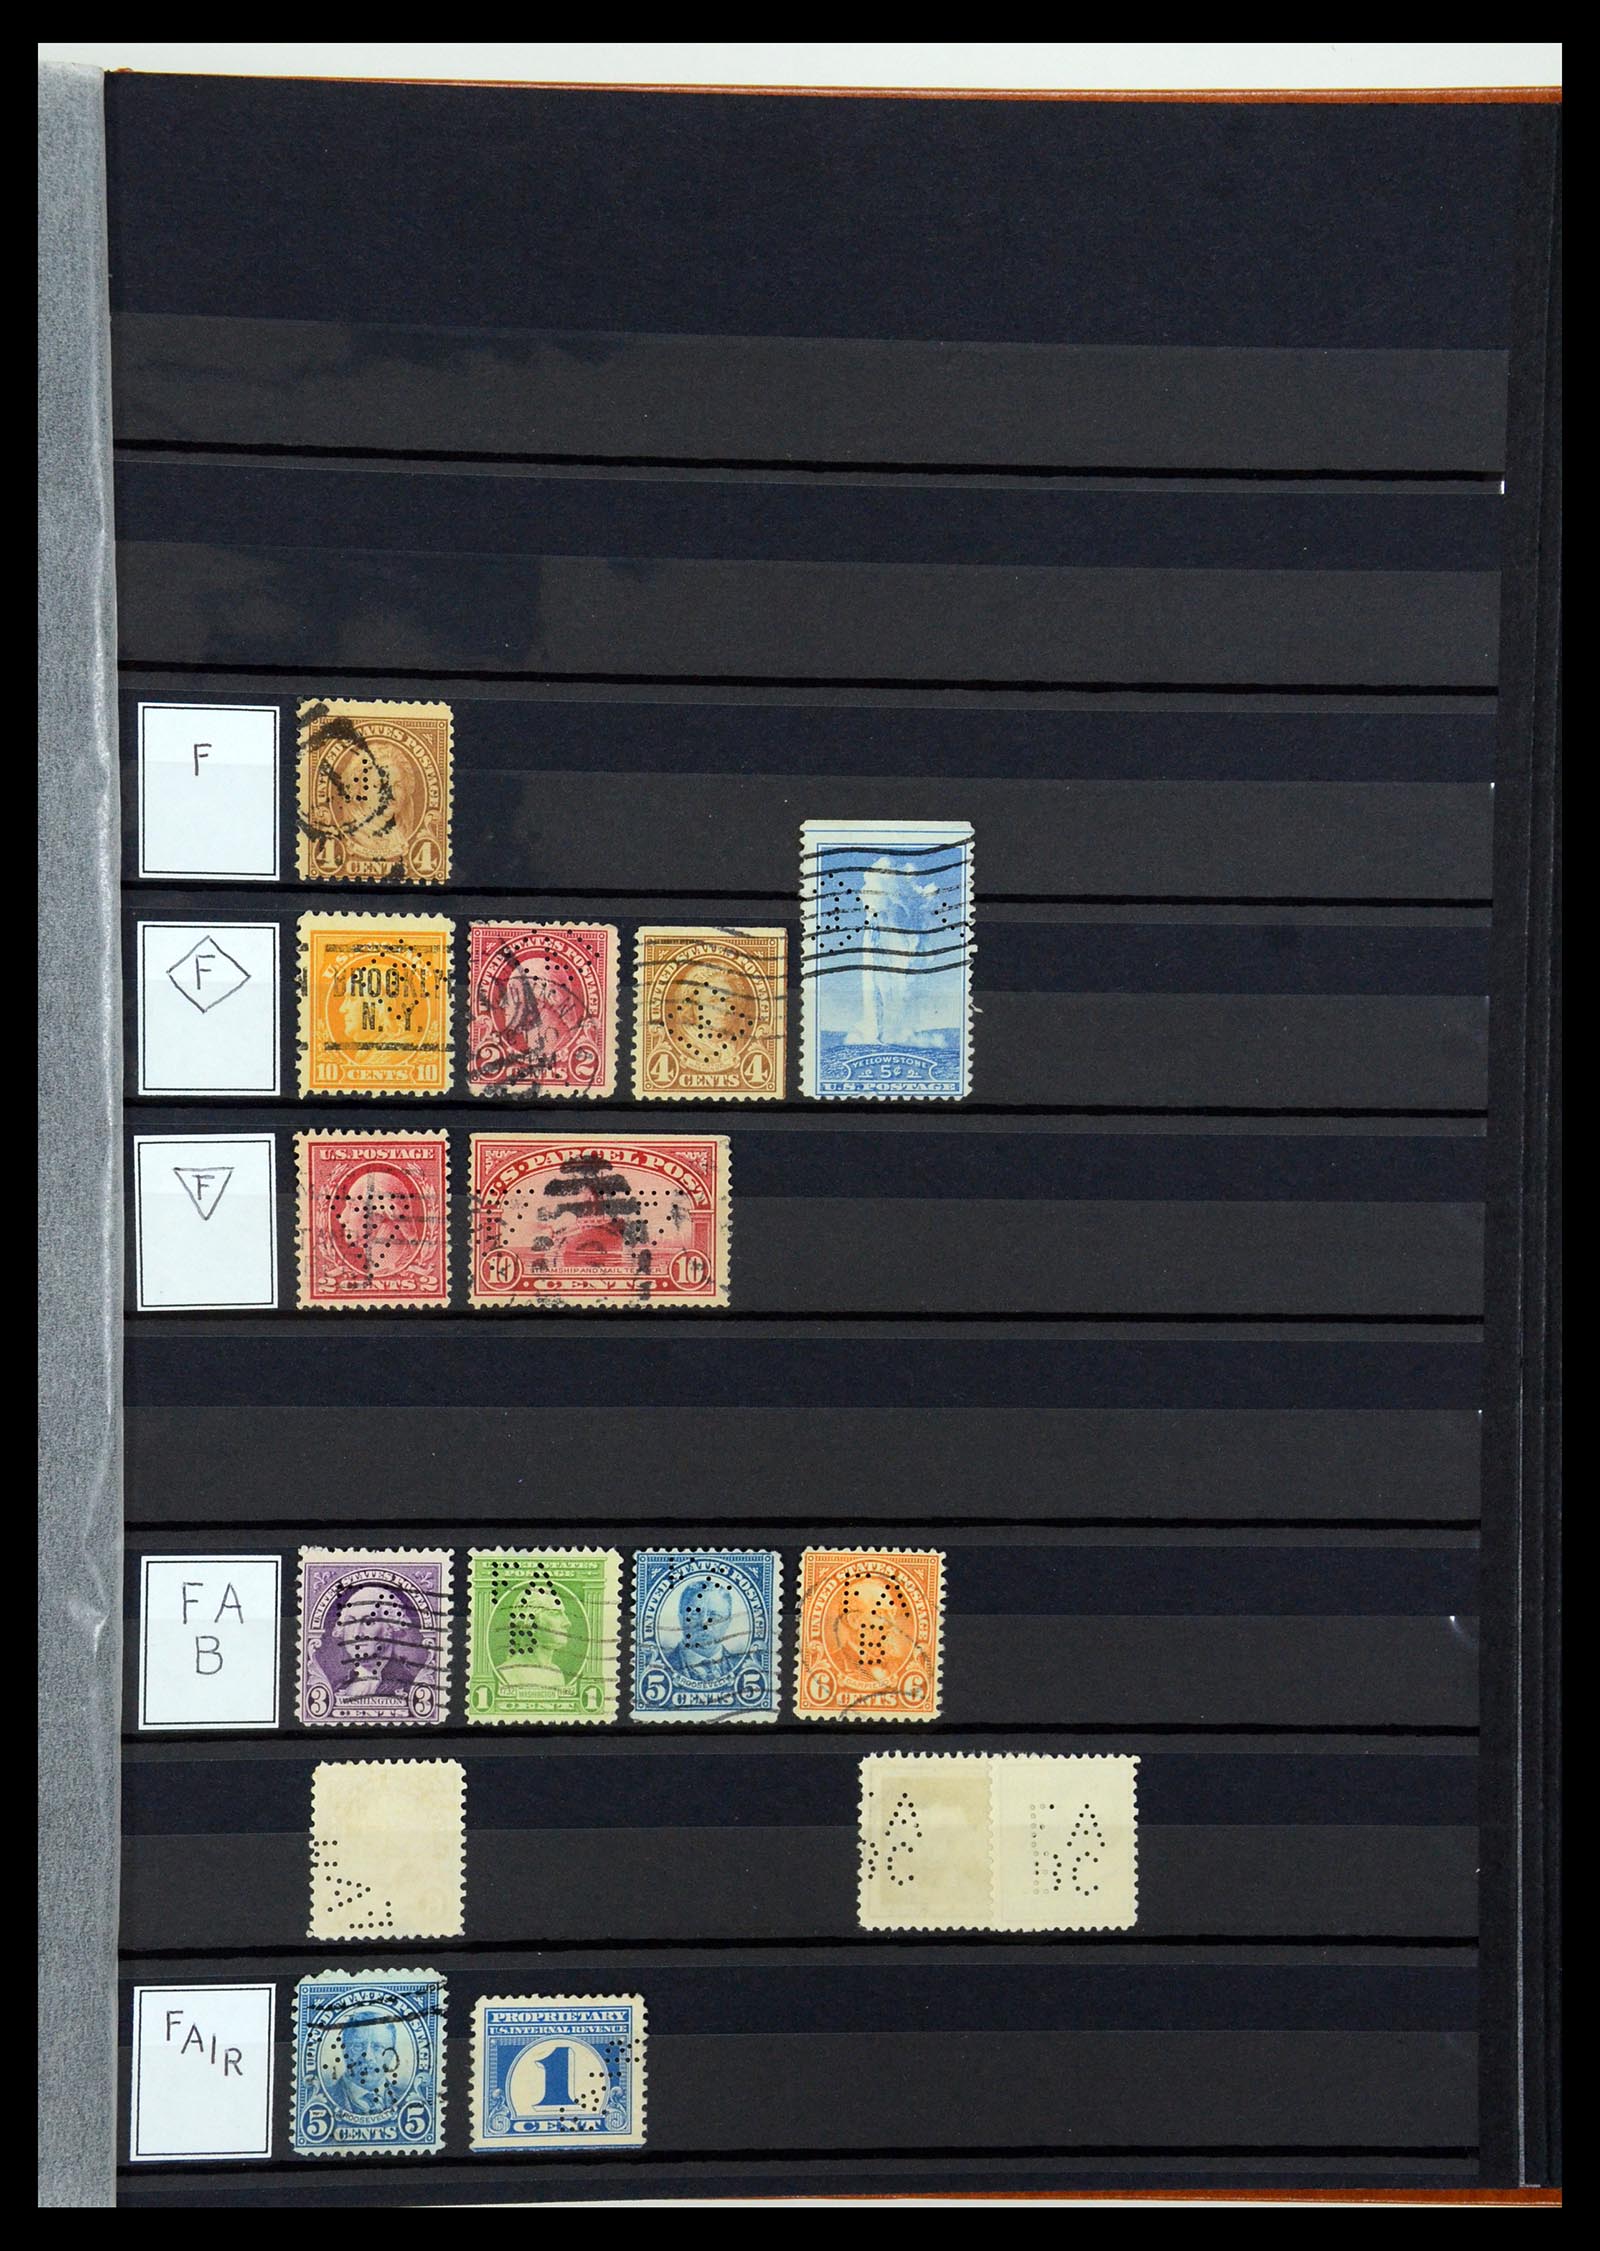 36388 043 - Stamp collection 36388 USA perfins.